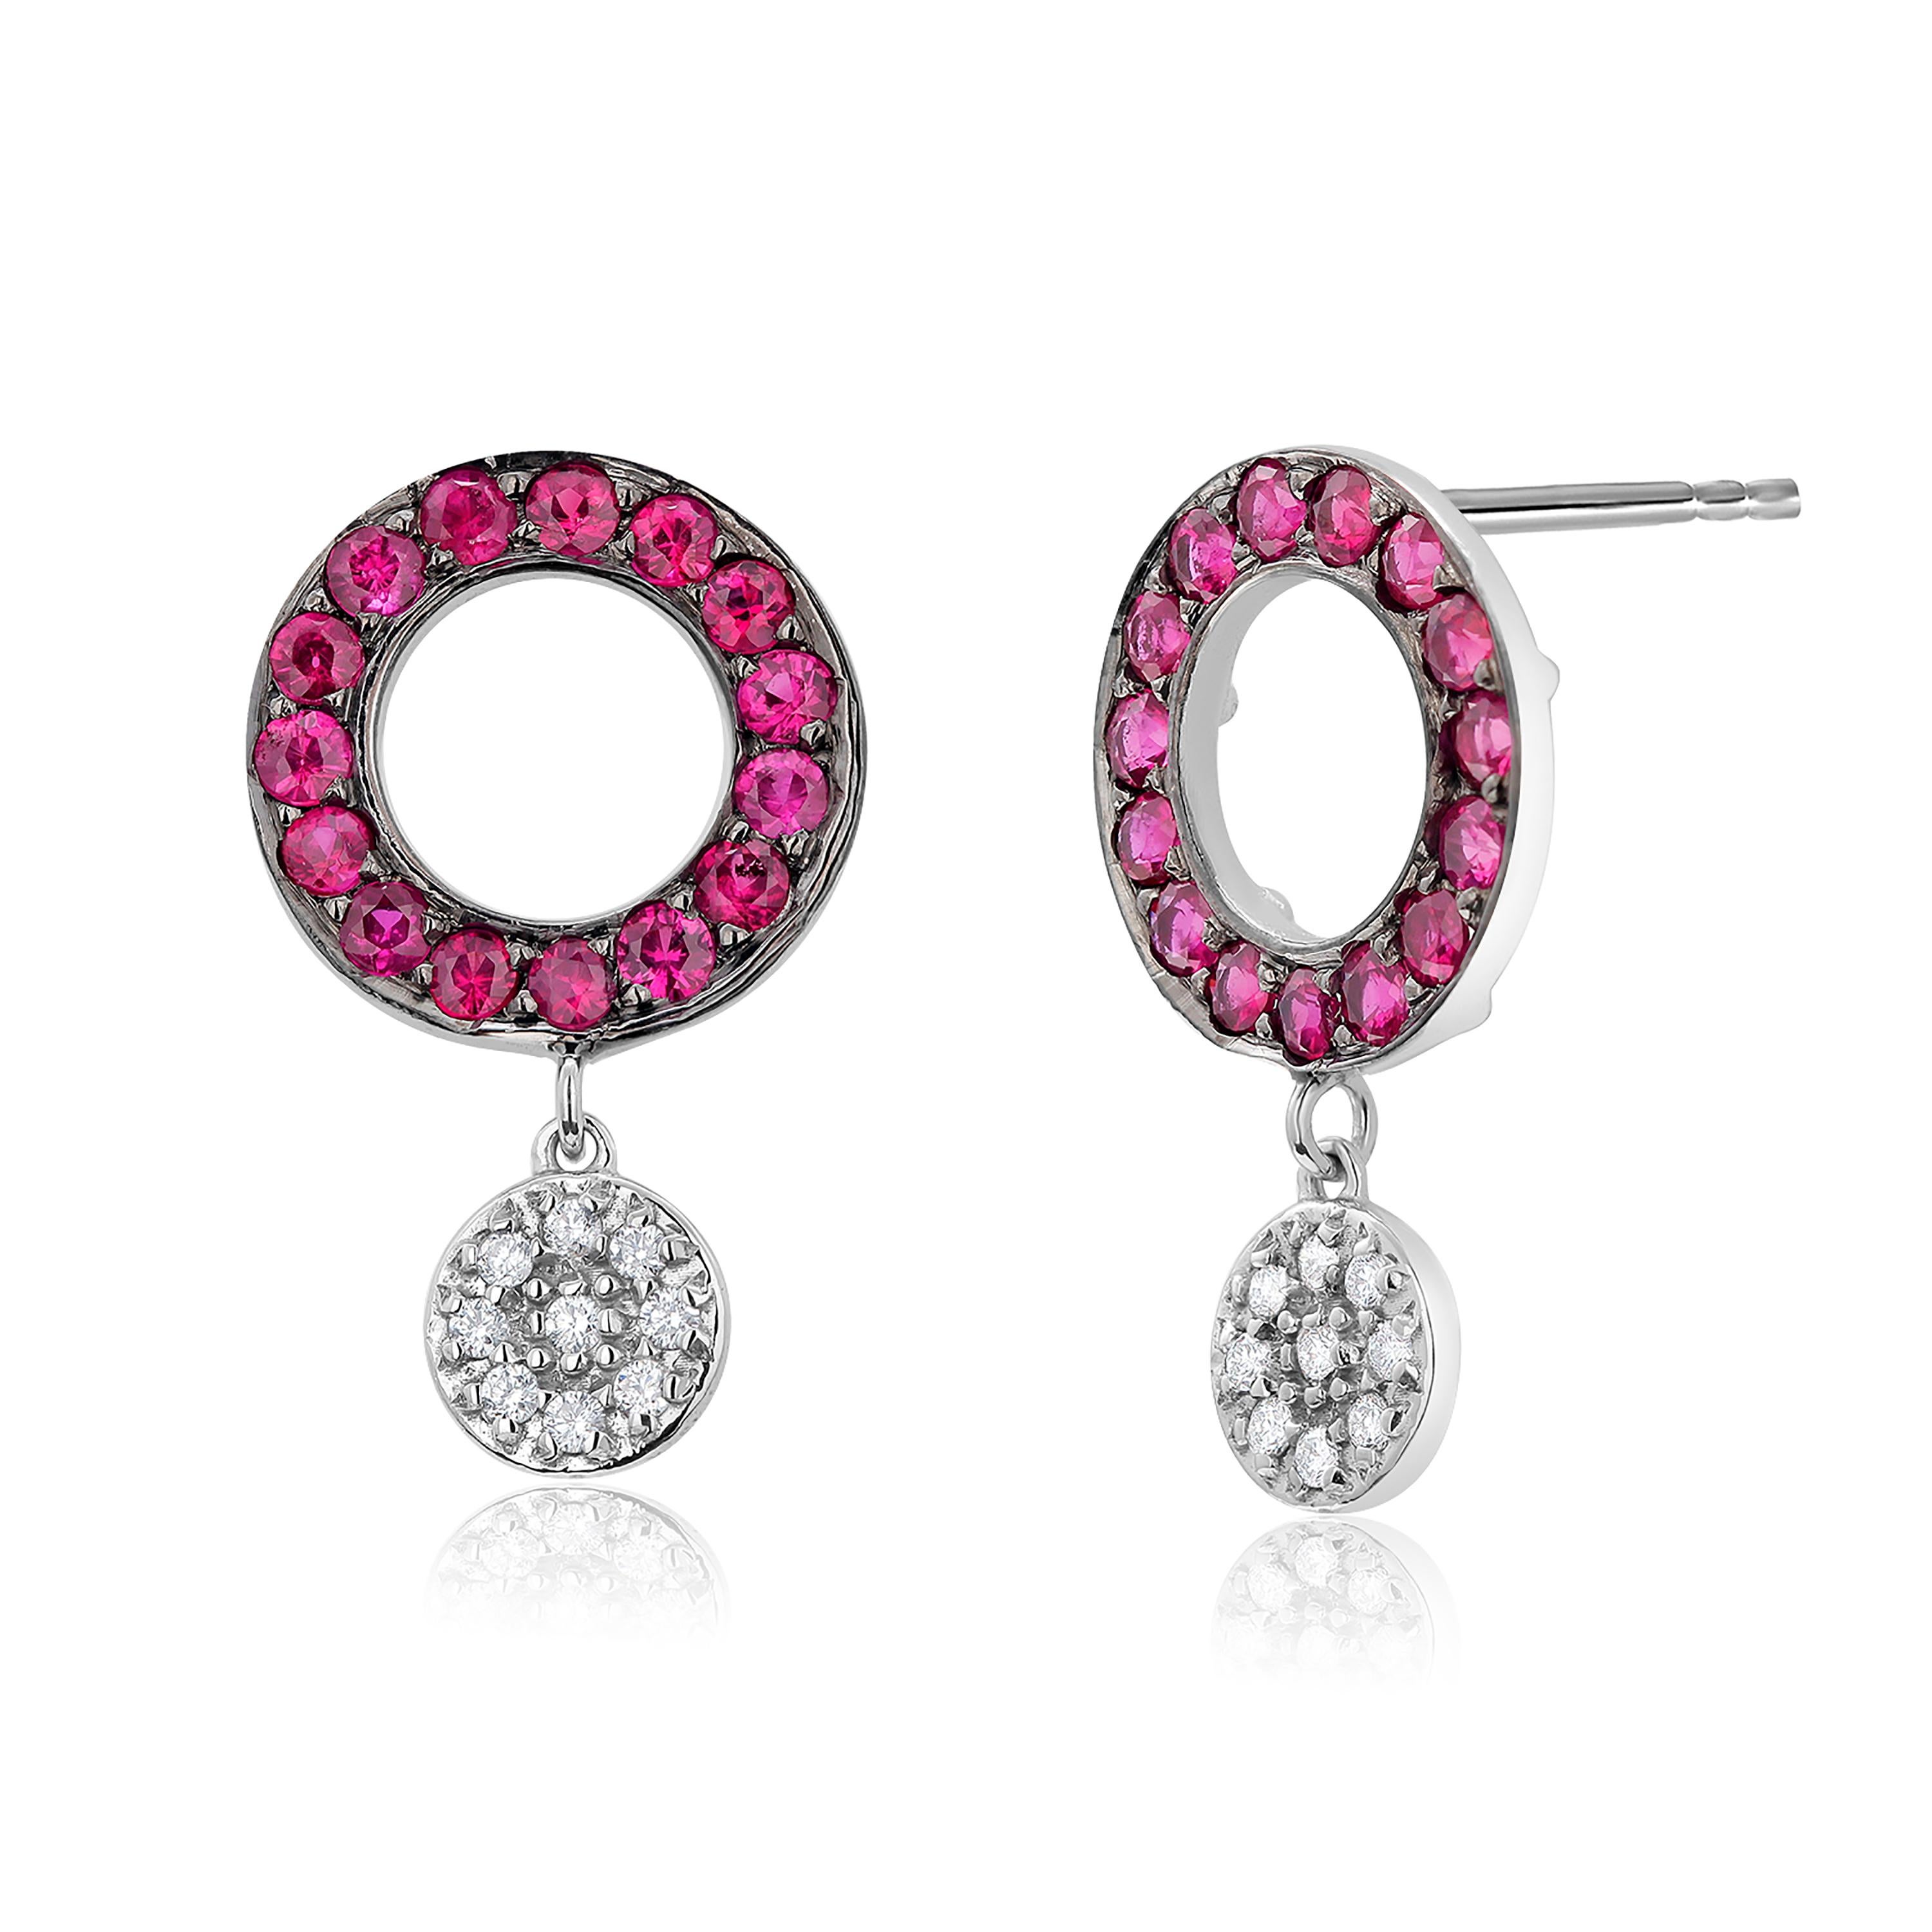 Fourteen karats white gold diamond and Blackened ruby circle cluster earrings 
Two round-shaped diamond drops weighing 0.20 carats
Round pave rubies circles, blackened, weighing 1.30 carats 
Ruby hue tone color is rose red 
New Earrings
Handmade in